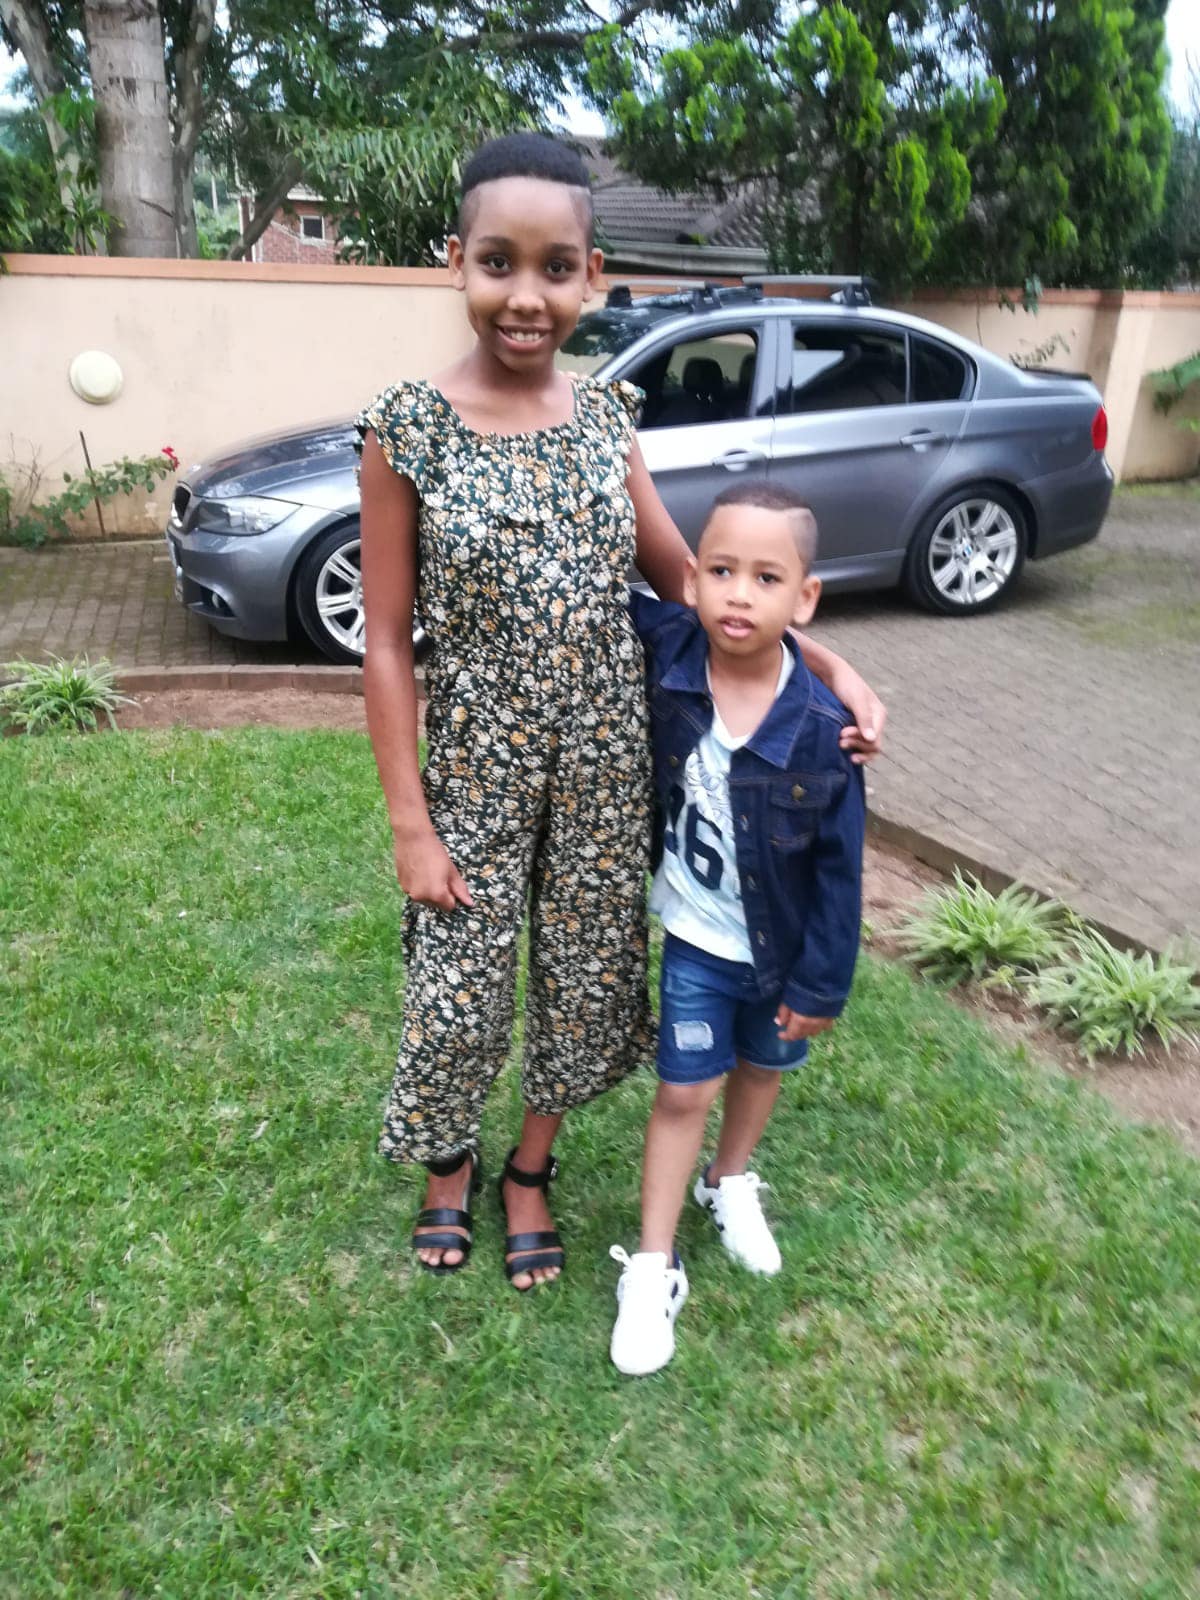 Search for runaway 5 and 11-year-old Siblings in Verulam